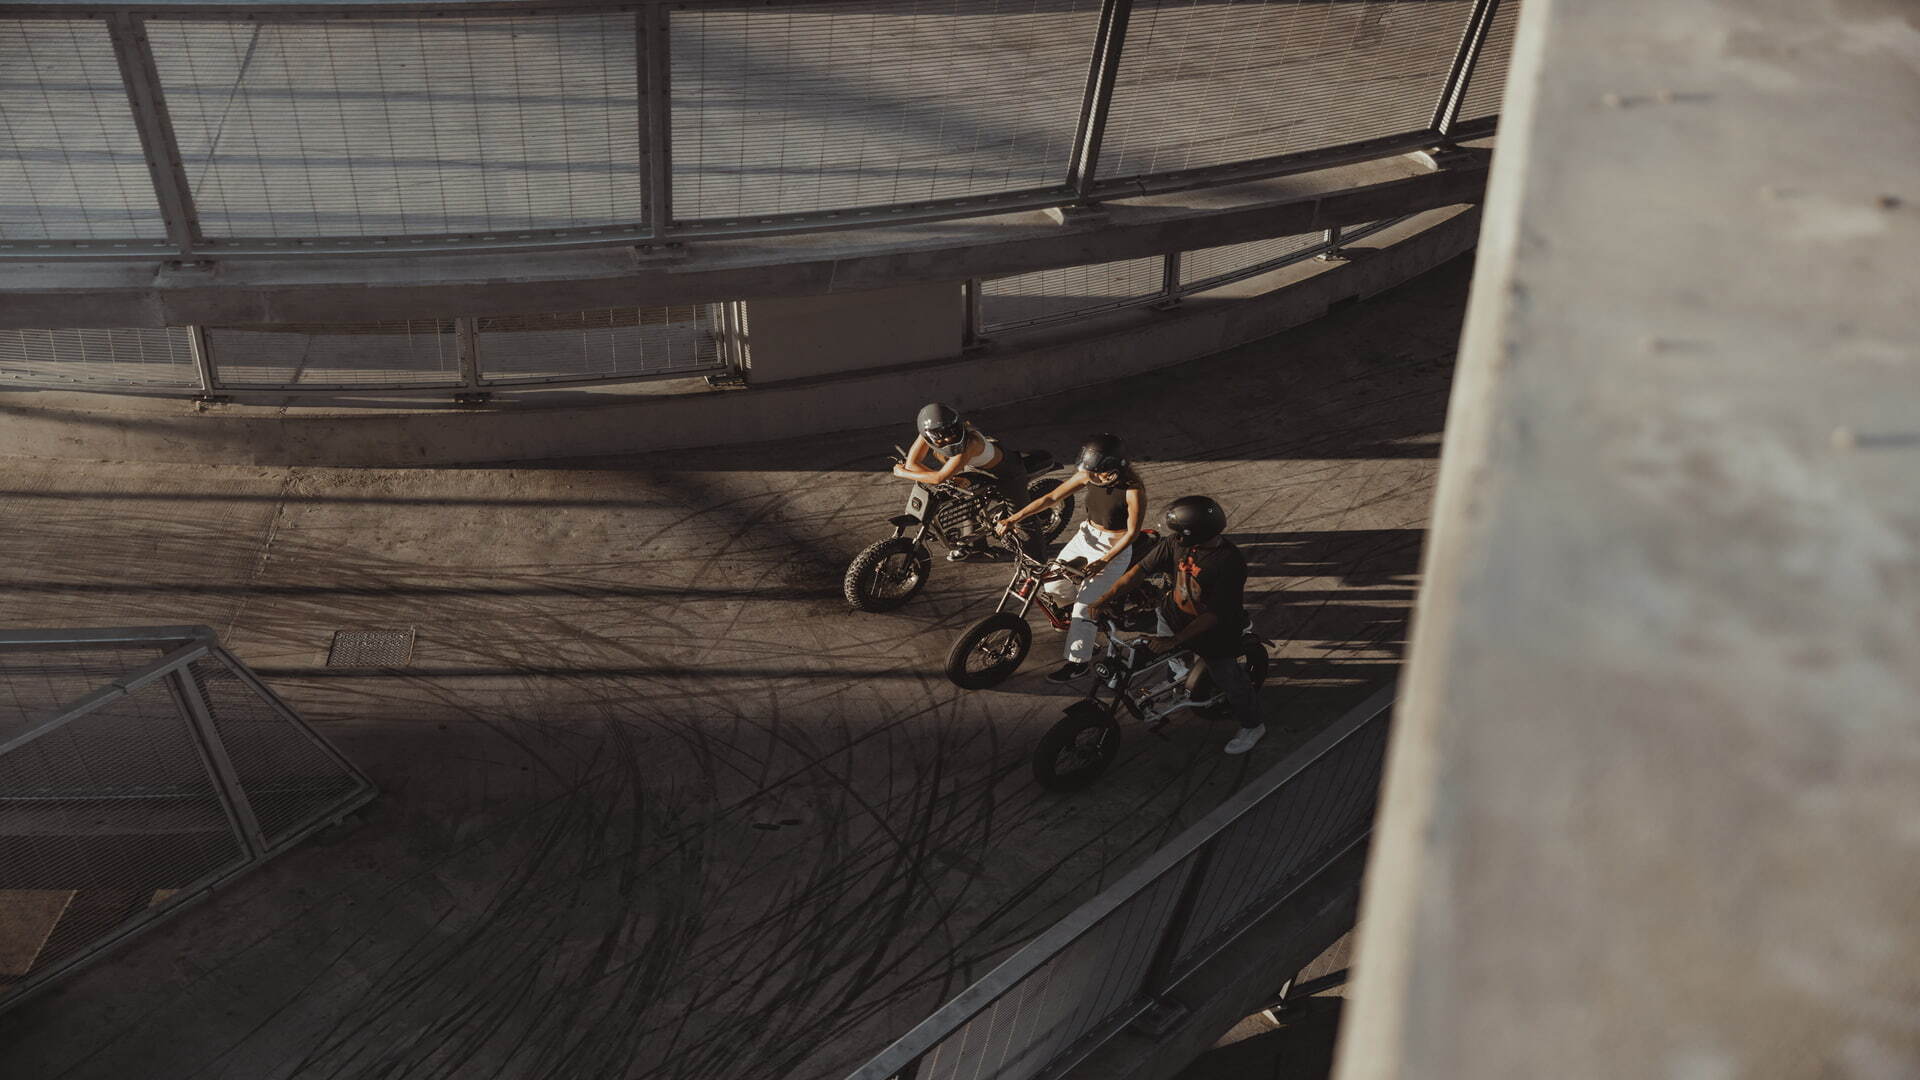 A shot from above of three women driving a Super73 bikes